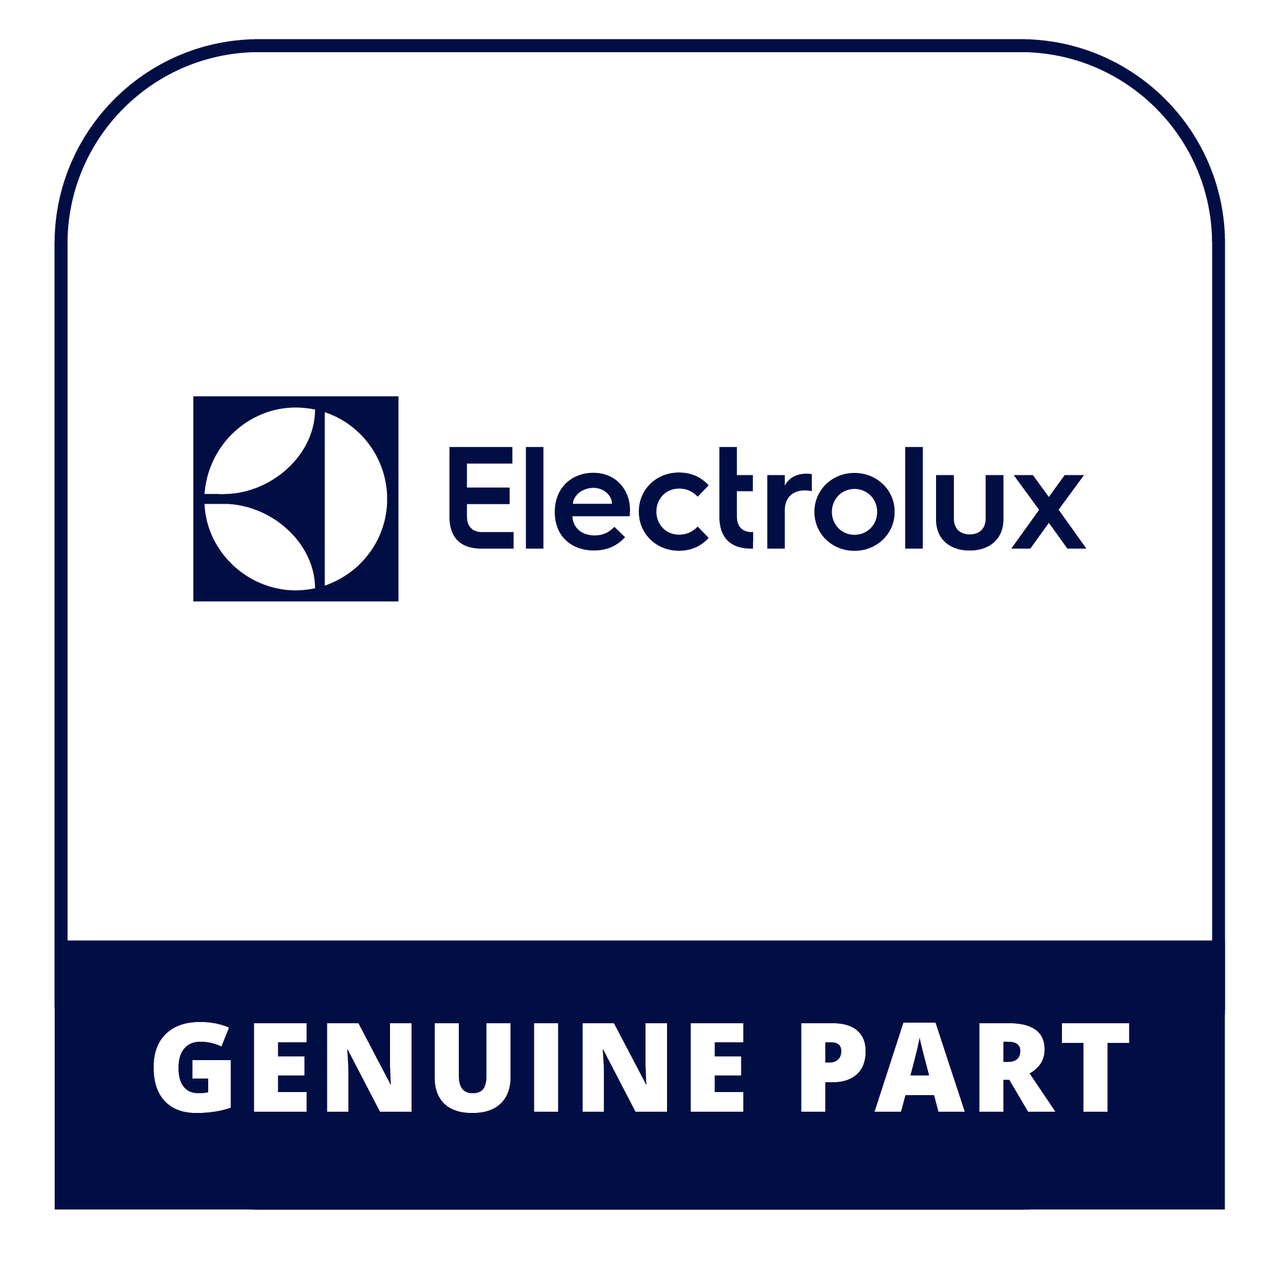 Frigidaire - Electrolux 316495127 Use & Care Guide - Genuine Electrolux Part